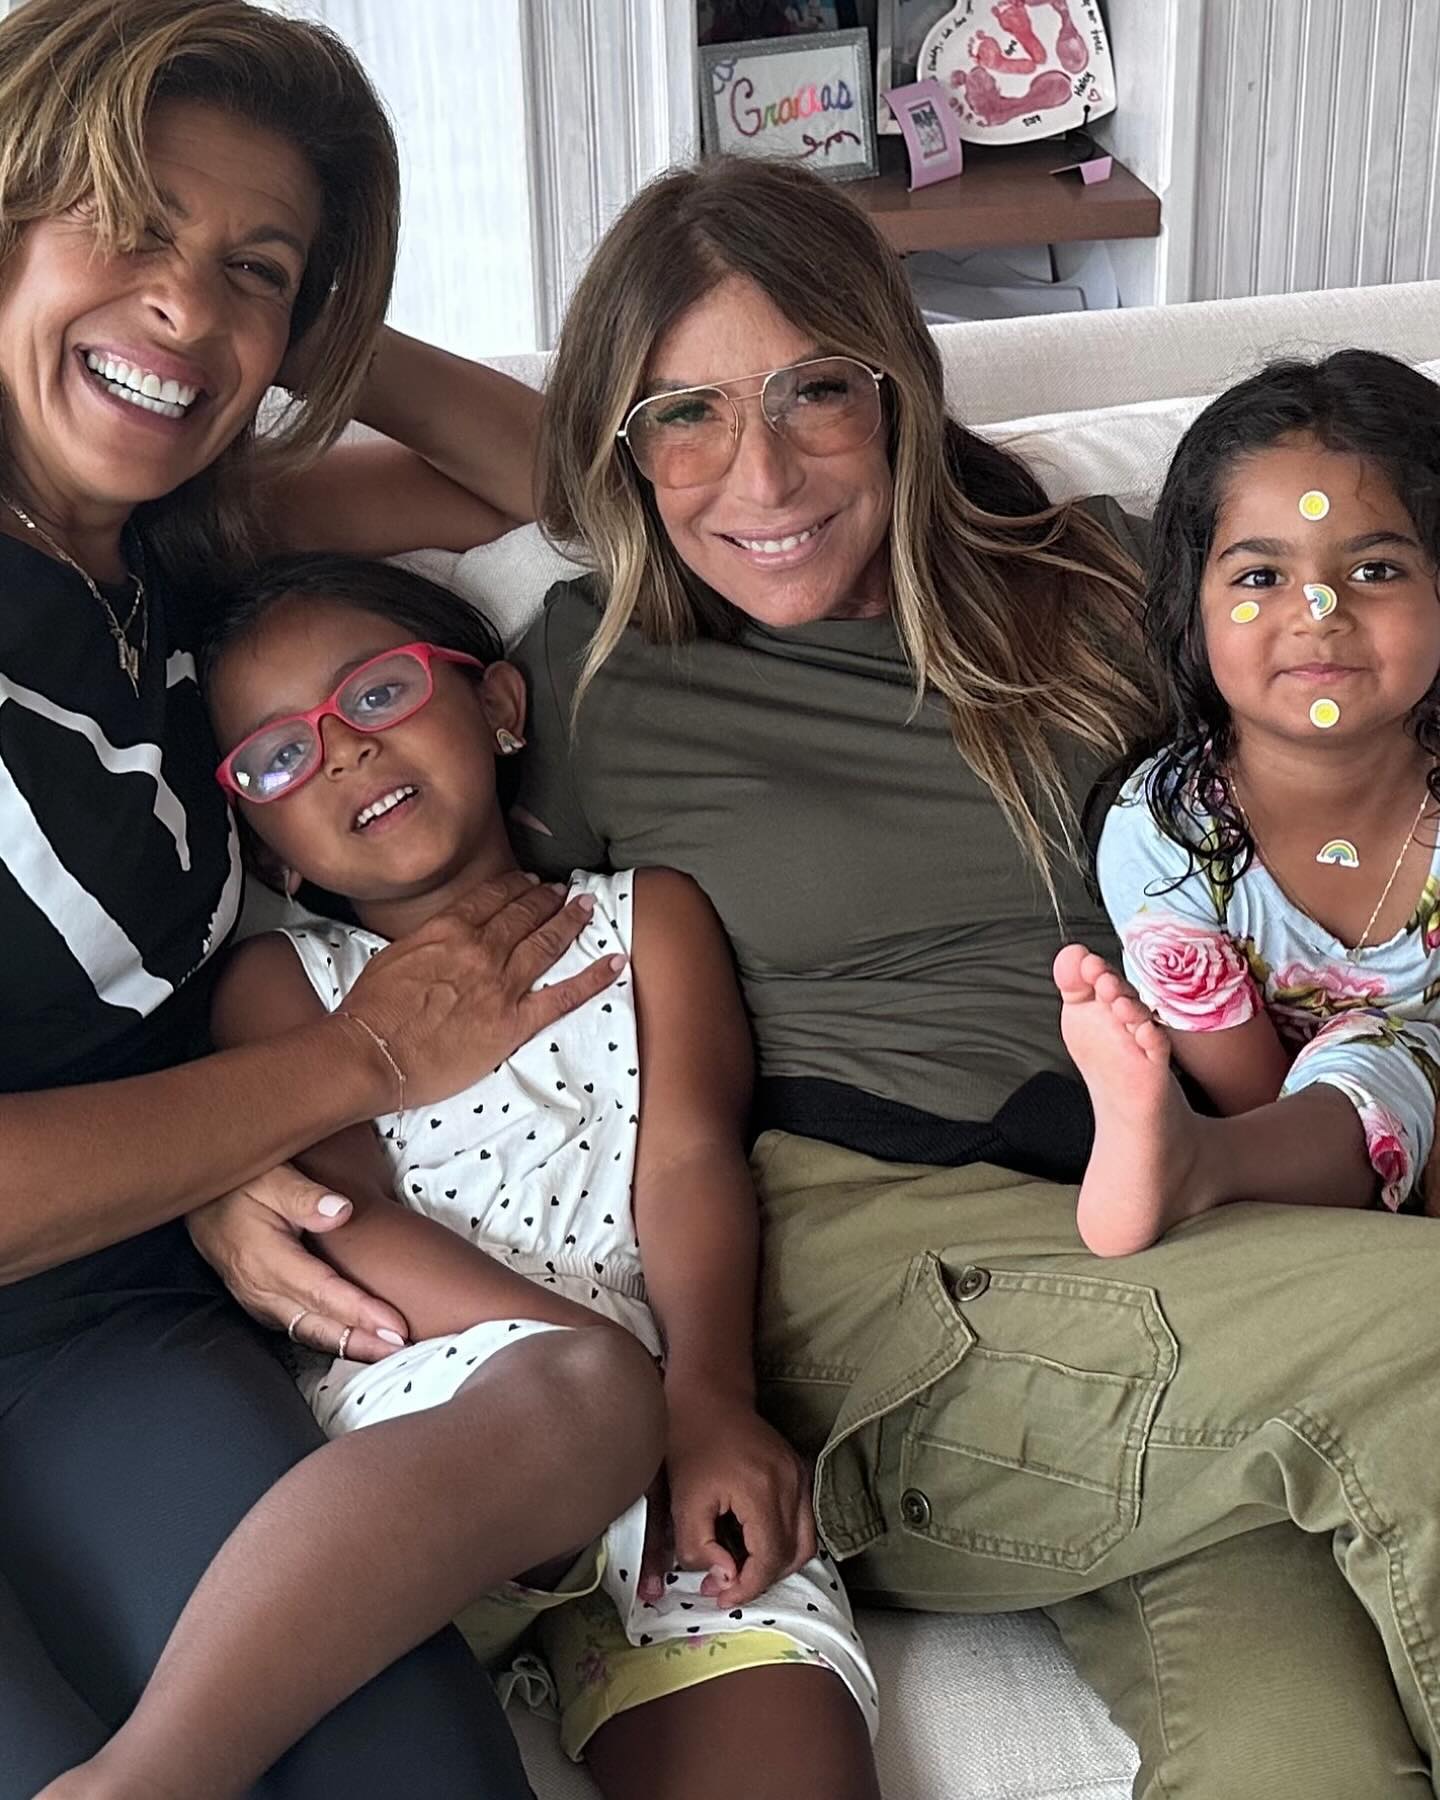 Hoda shared a snap from her and her girls' recent trip to the beach